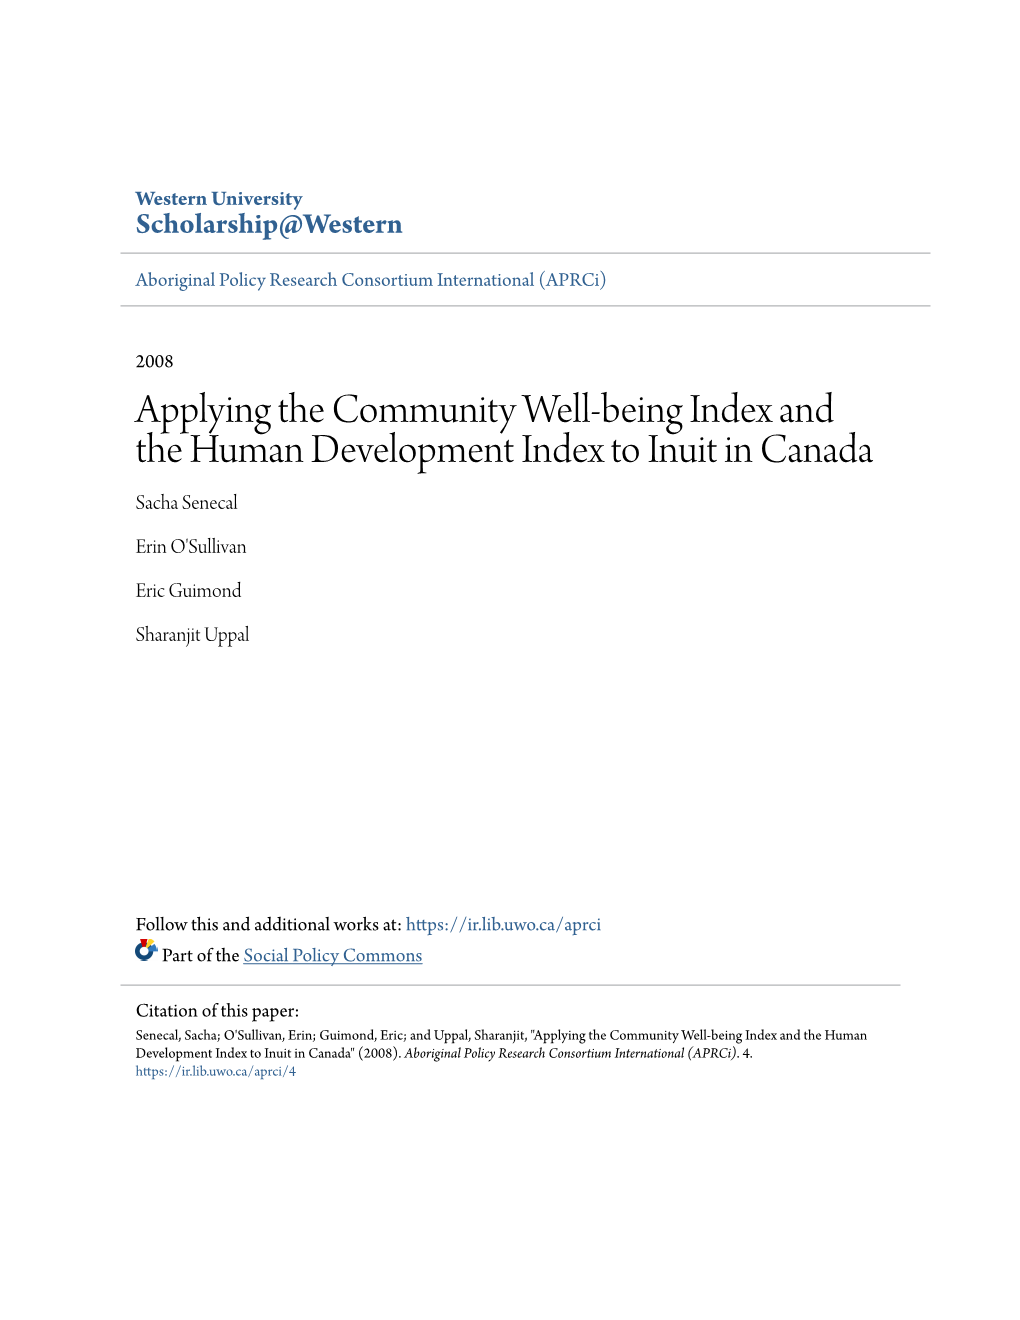 Applying the Community Well-Being Index and the Human Development Index to Inuit in Canada Sacha Senecal